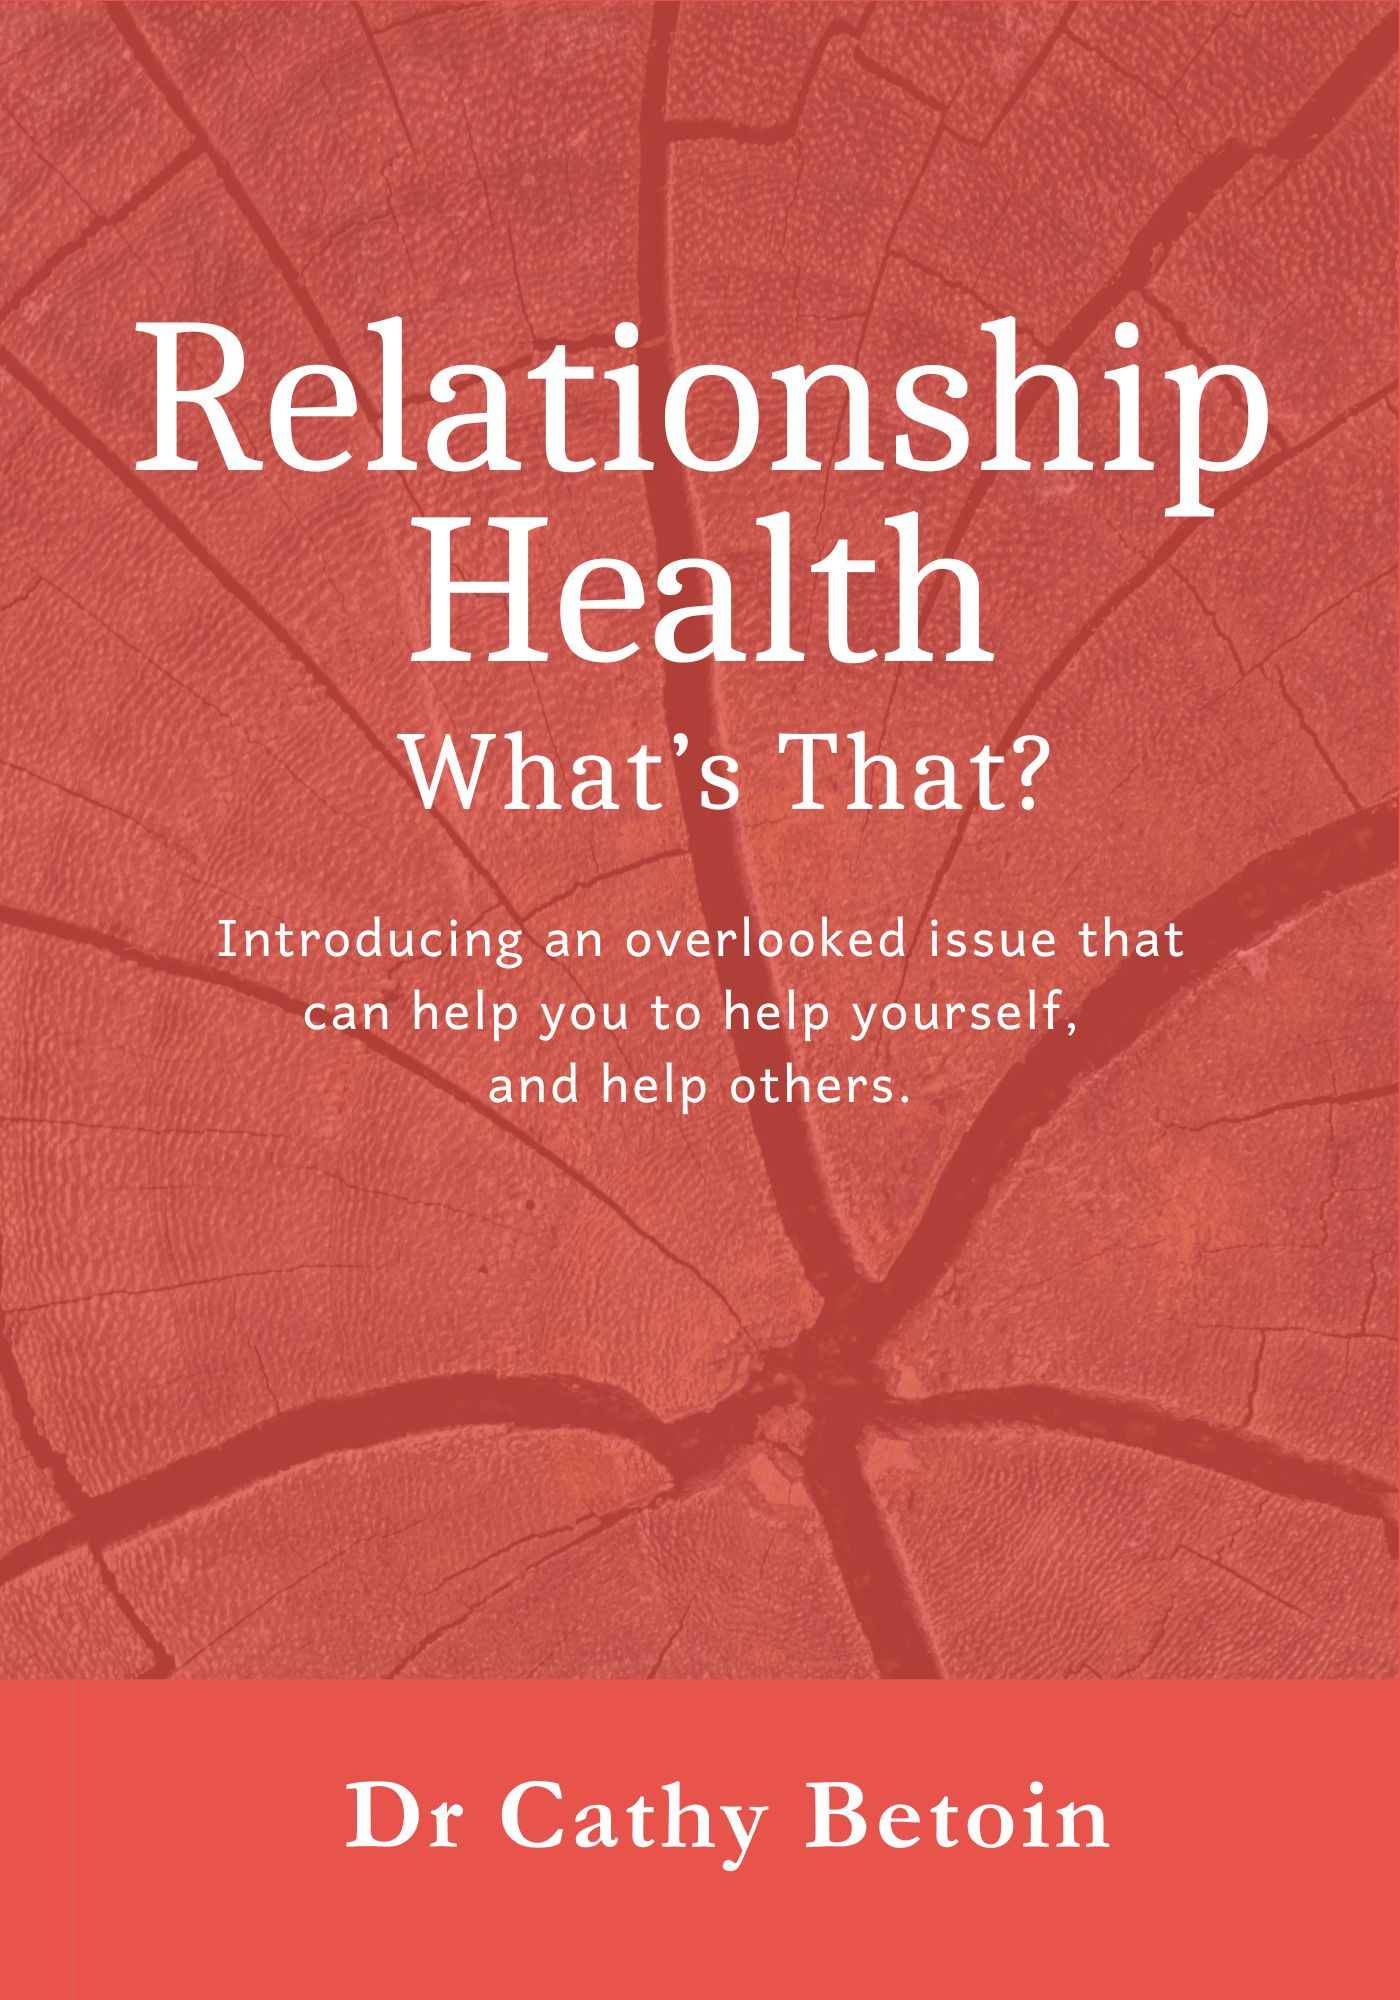 Copy of Red - Relationship Health - What's That  1 (7 x 10 in)